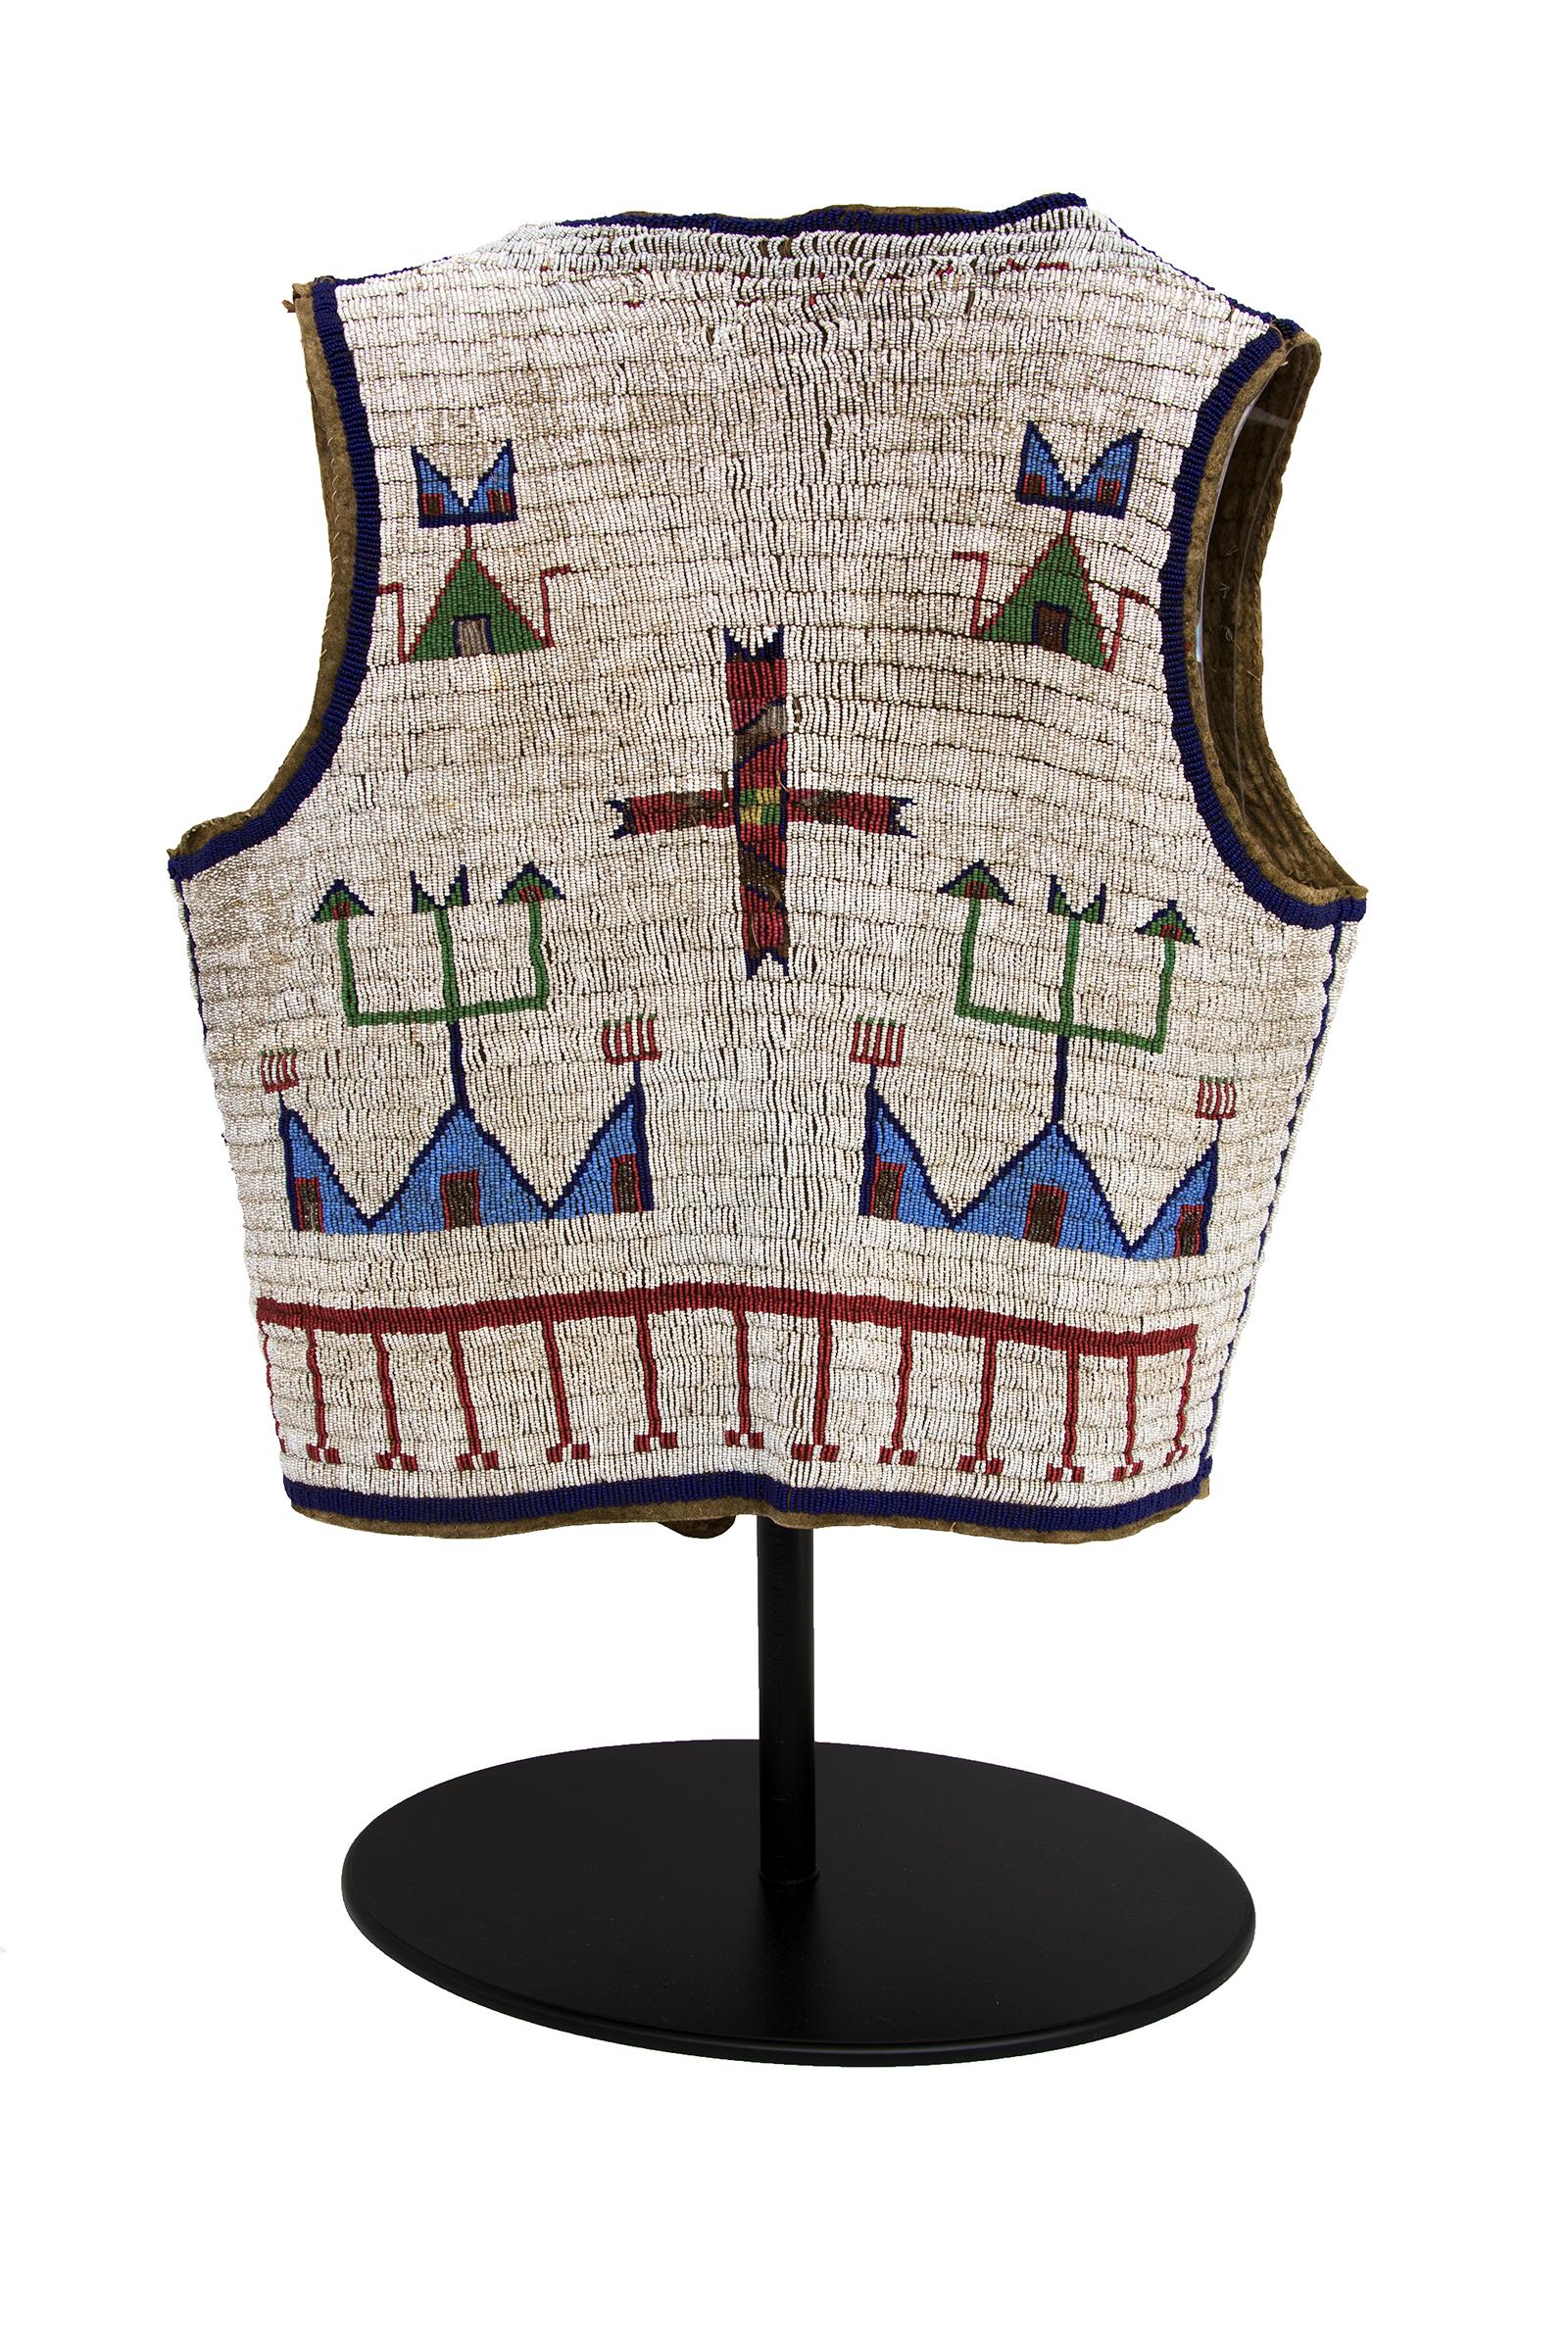 Vintage 19th century Sioux (Plains Indian) Native American antique pictorial beaded hide vest, circa 1875-1900. Pictorial design includes tipi (teepee) motifs and geometric elements in white, light blue, dark blue, red, green and metallic trade